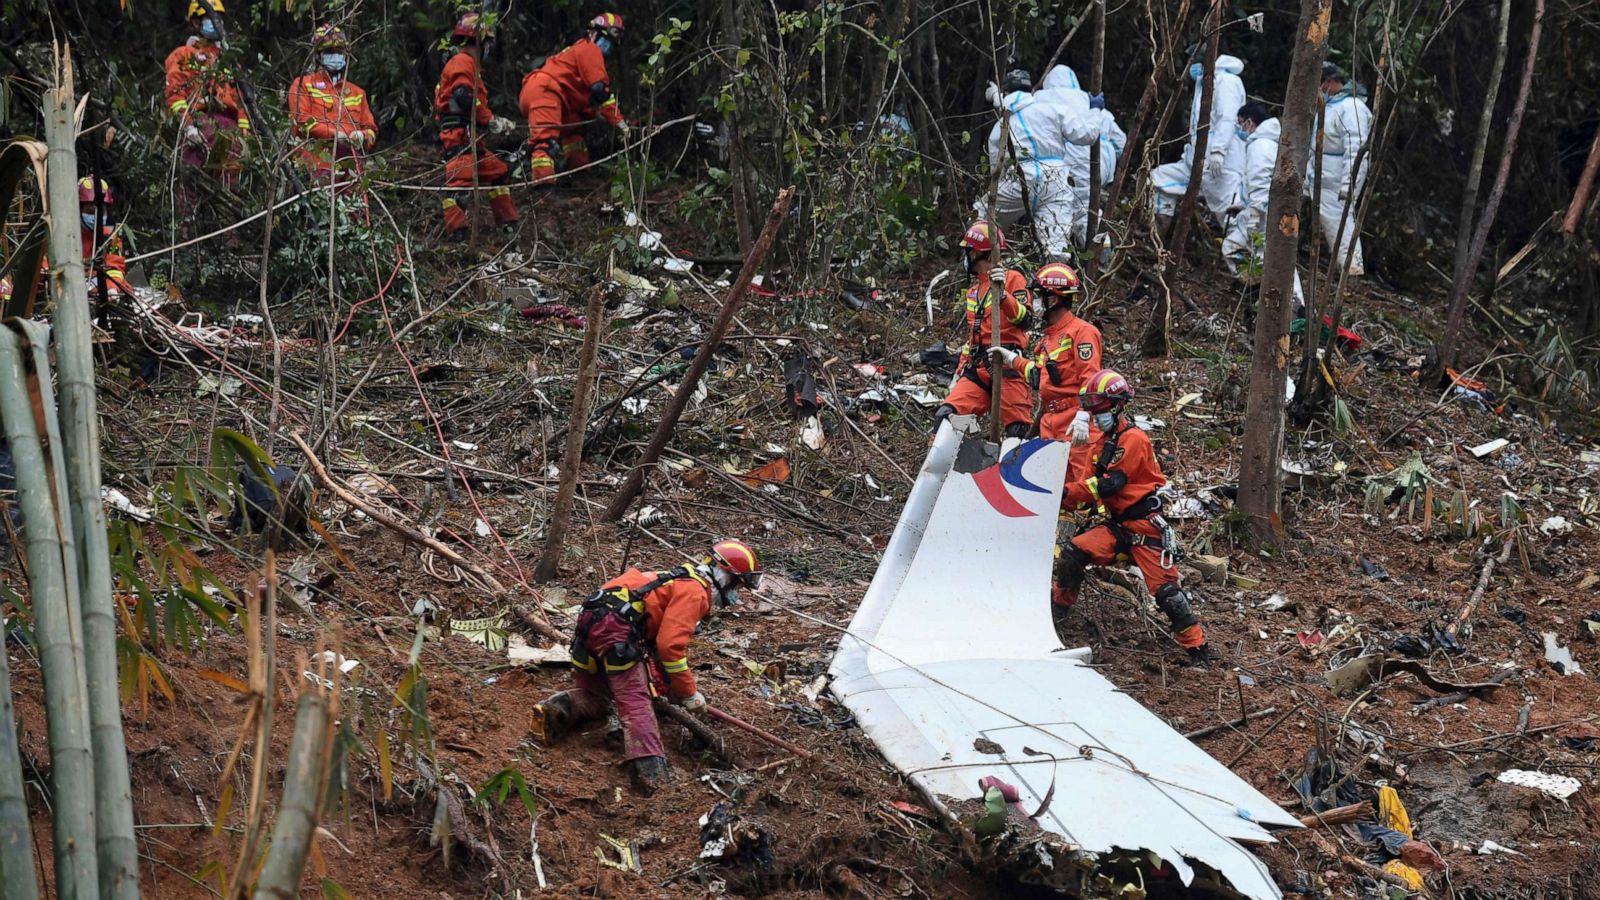 Chinese plane crash that killed 132 caused by intentional act: US officials